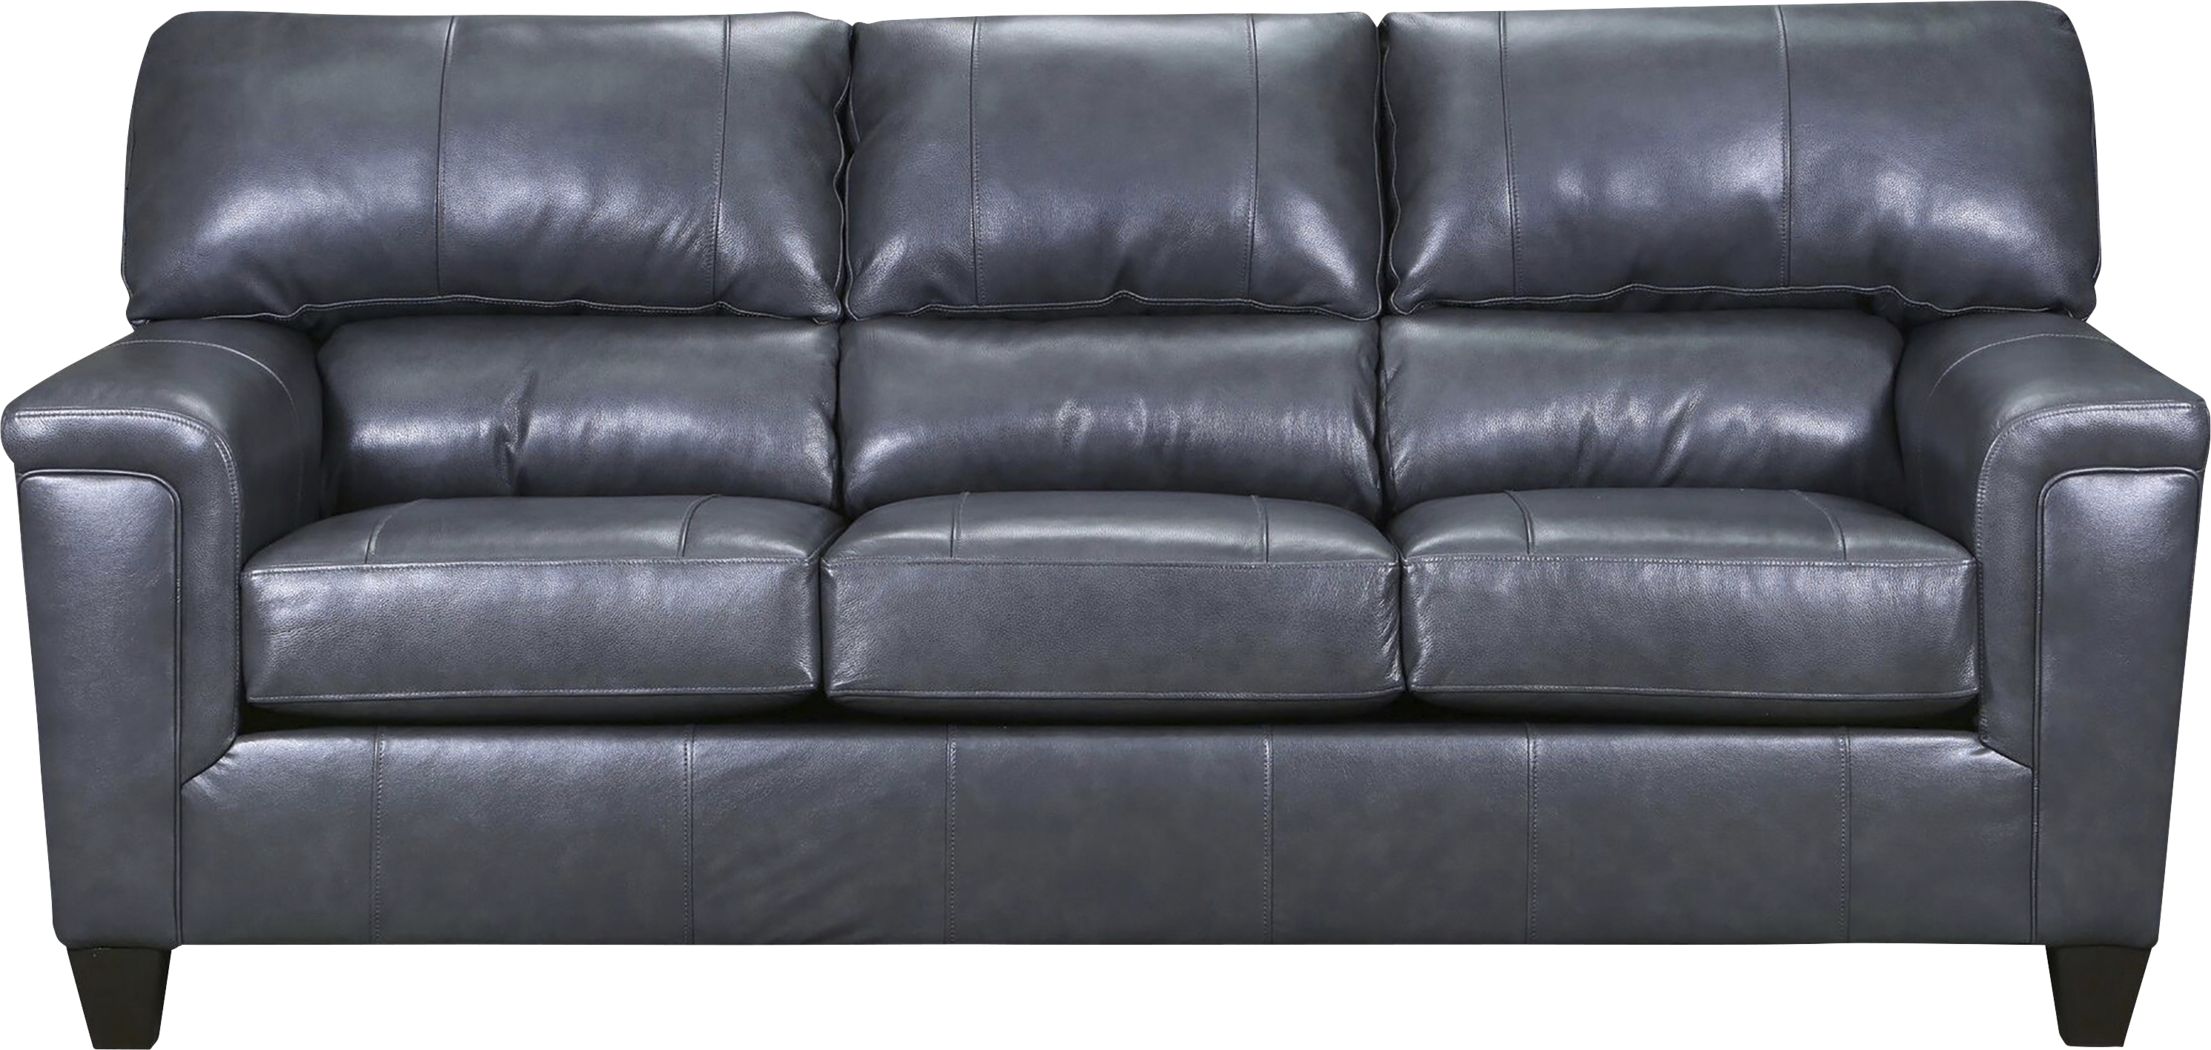 Leather Living Room Furniture, Leather Furniture Fort Worth